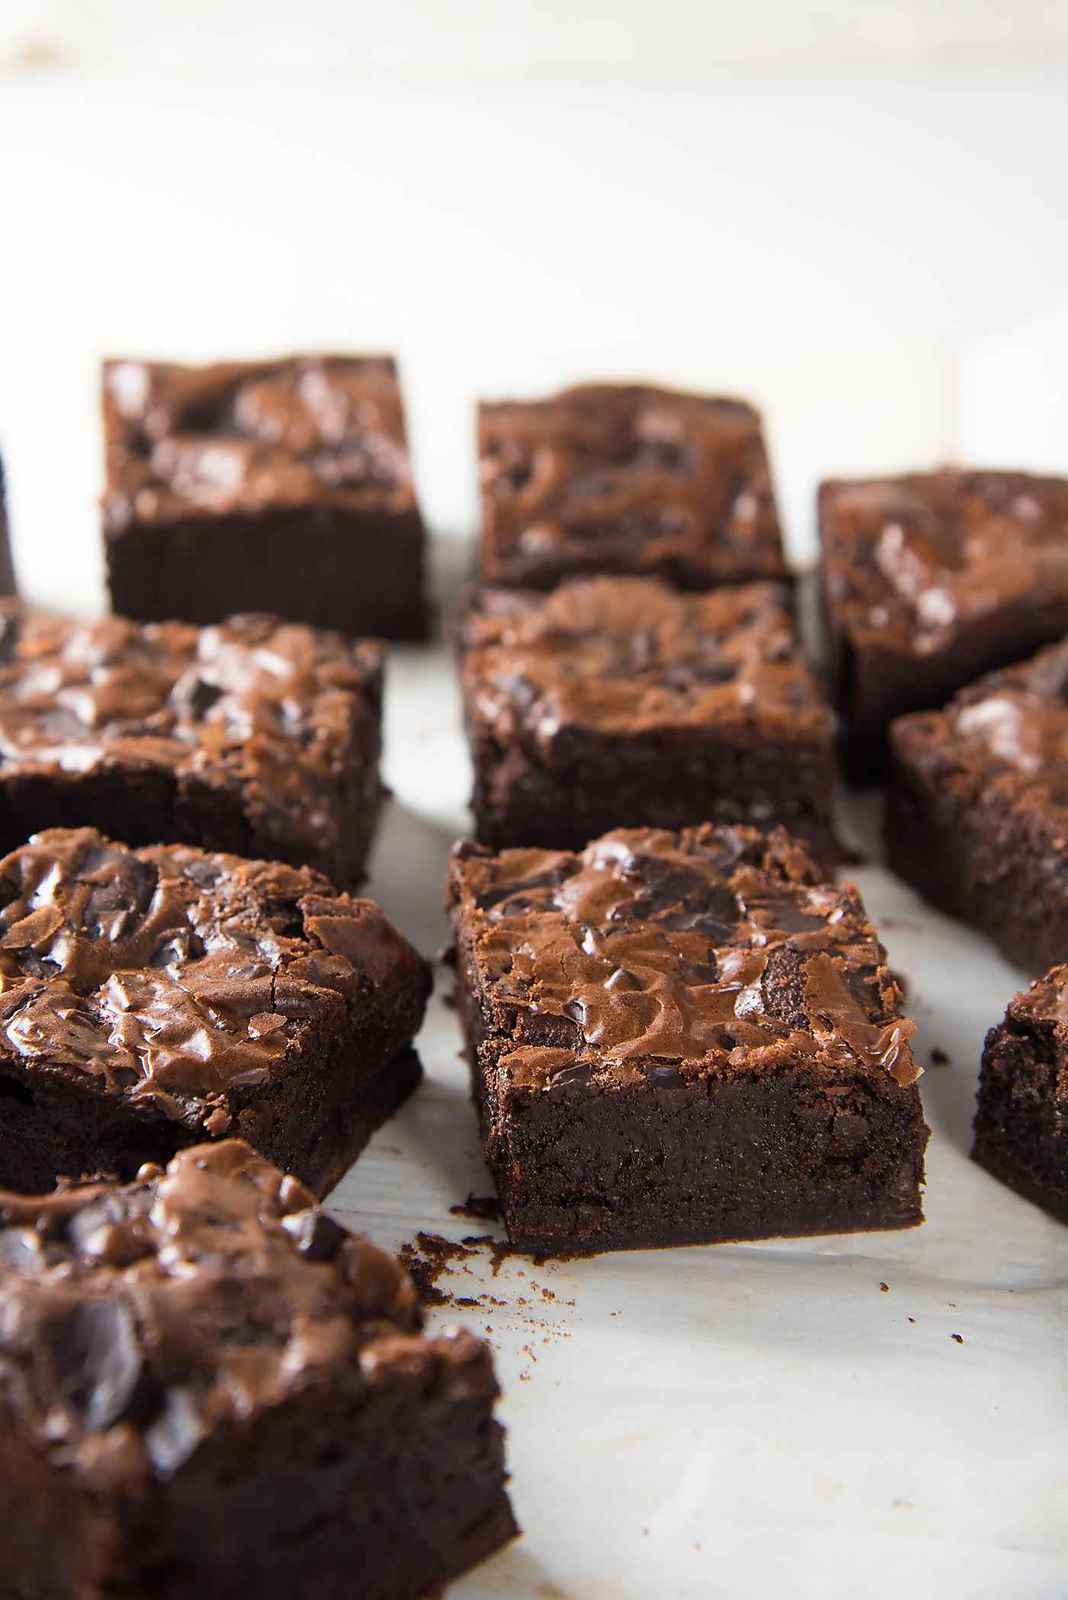 How to make brownies with shiny crust